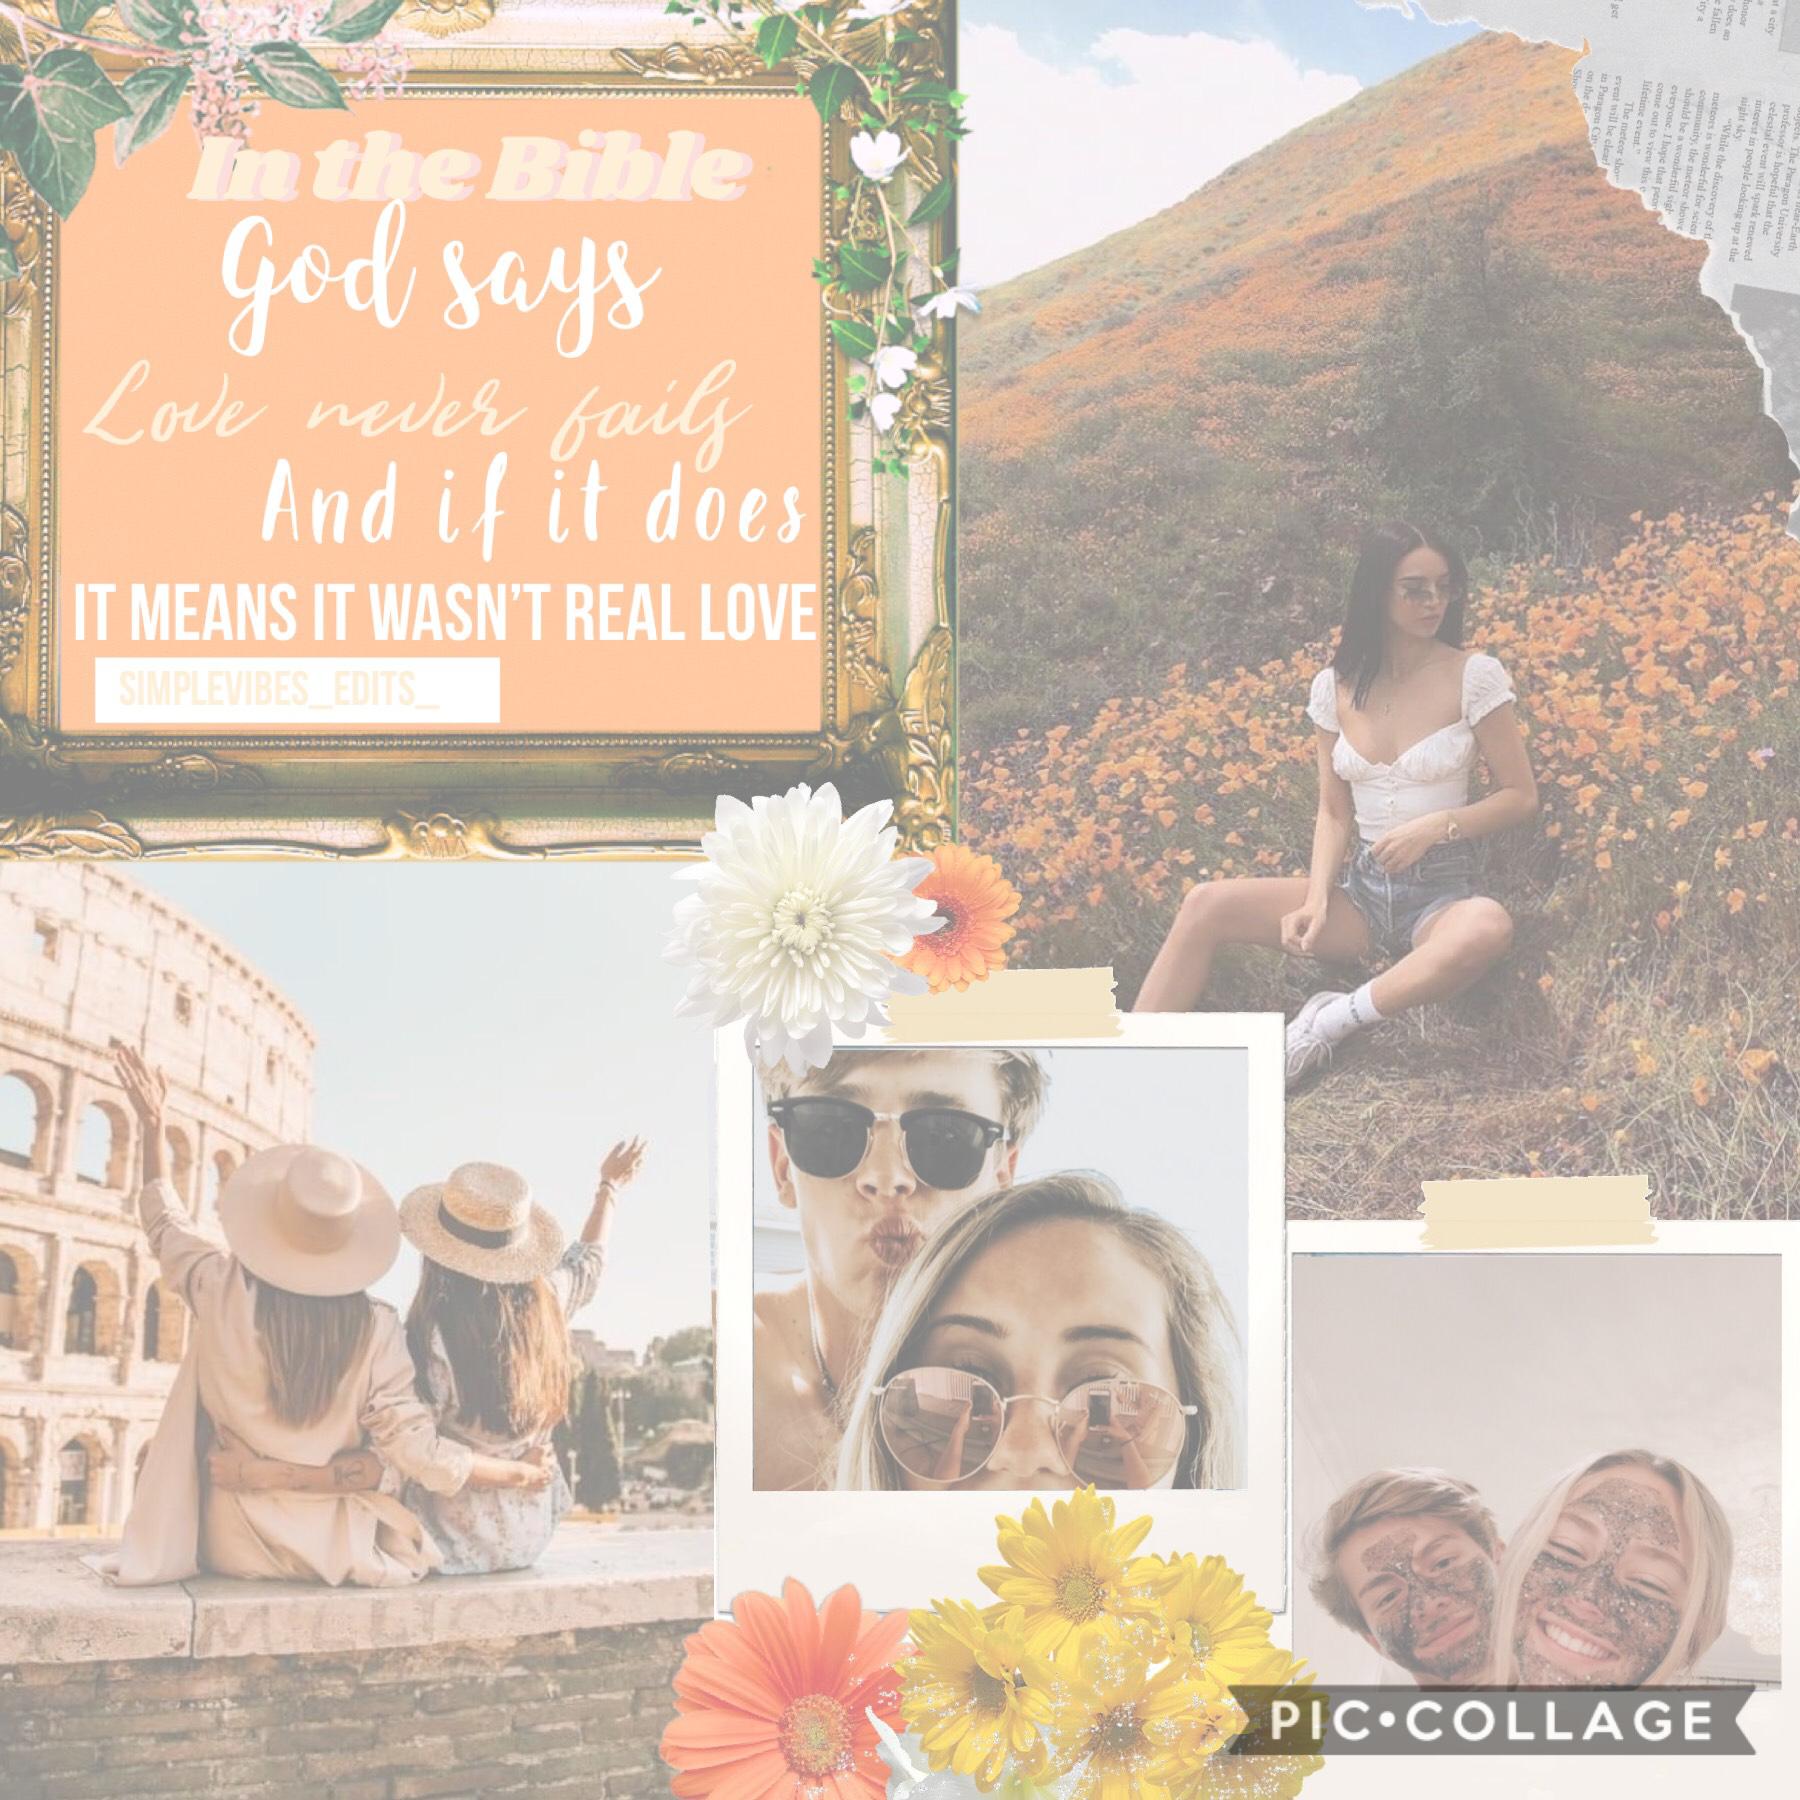 💛Tap💛
Hope u like this collage thx so much for all of ur advice I am trying new things to find my style make sure to like and comment 
Qotd: what is ur style of collages
Aotd: I am trying to find mine but I’m sure I’ll have one soon 